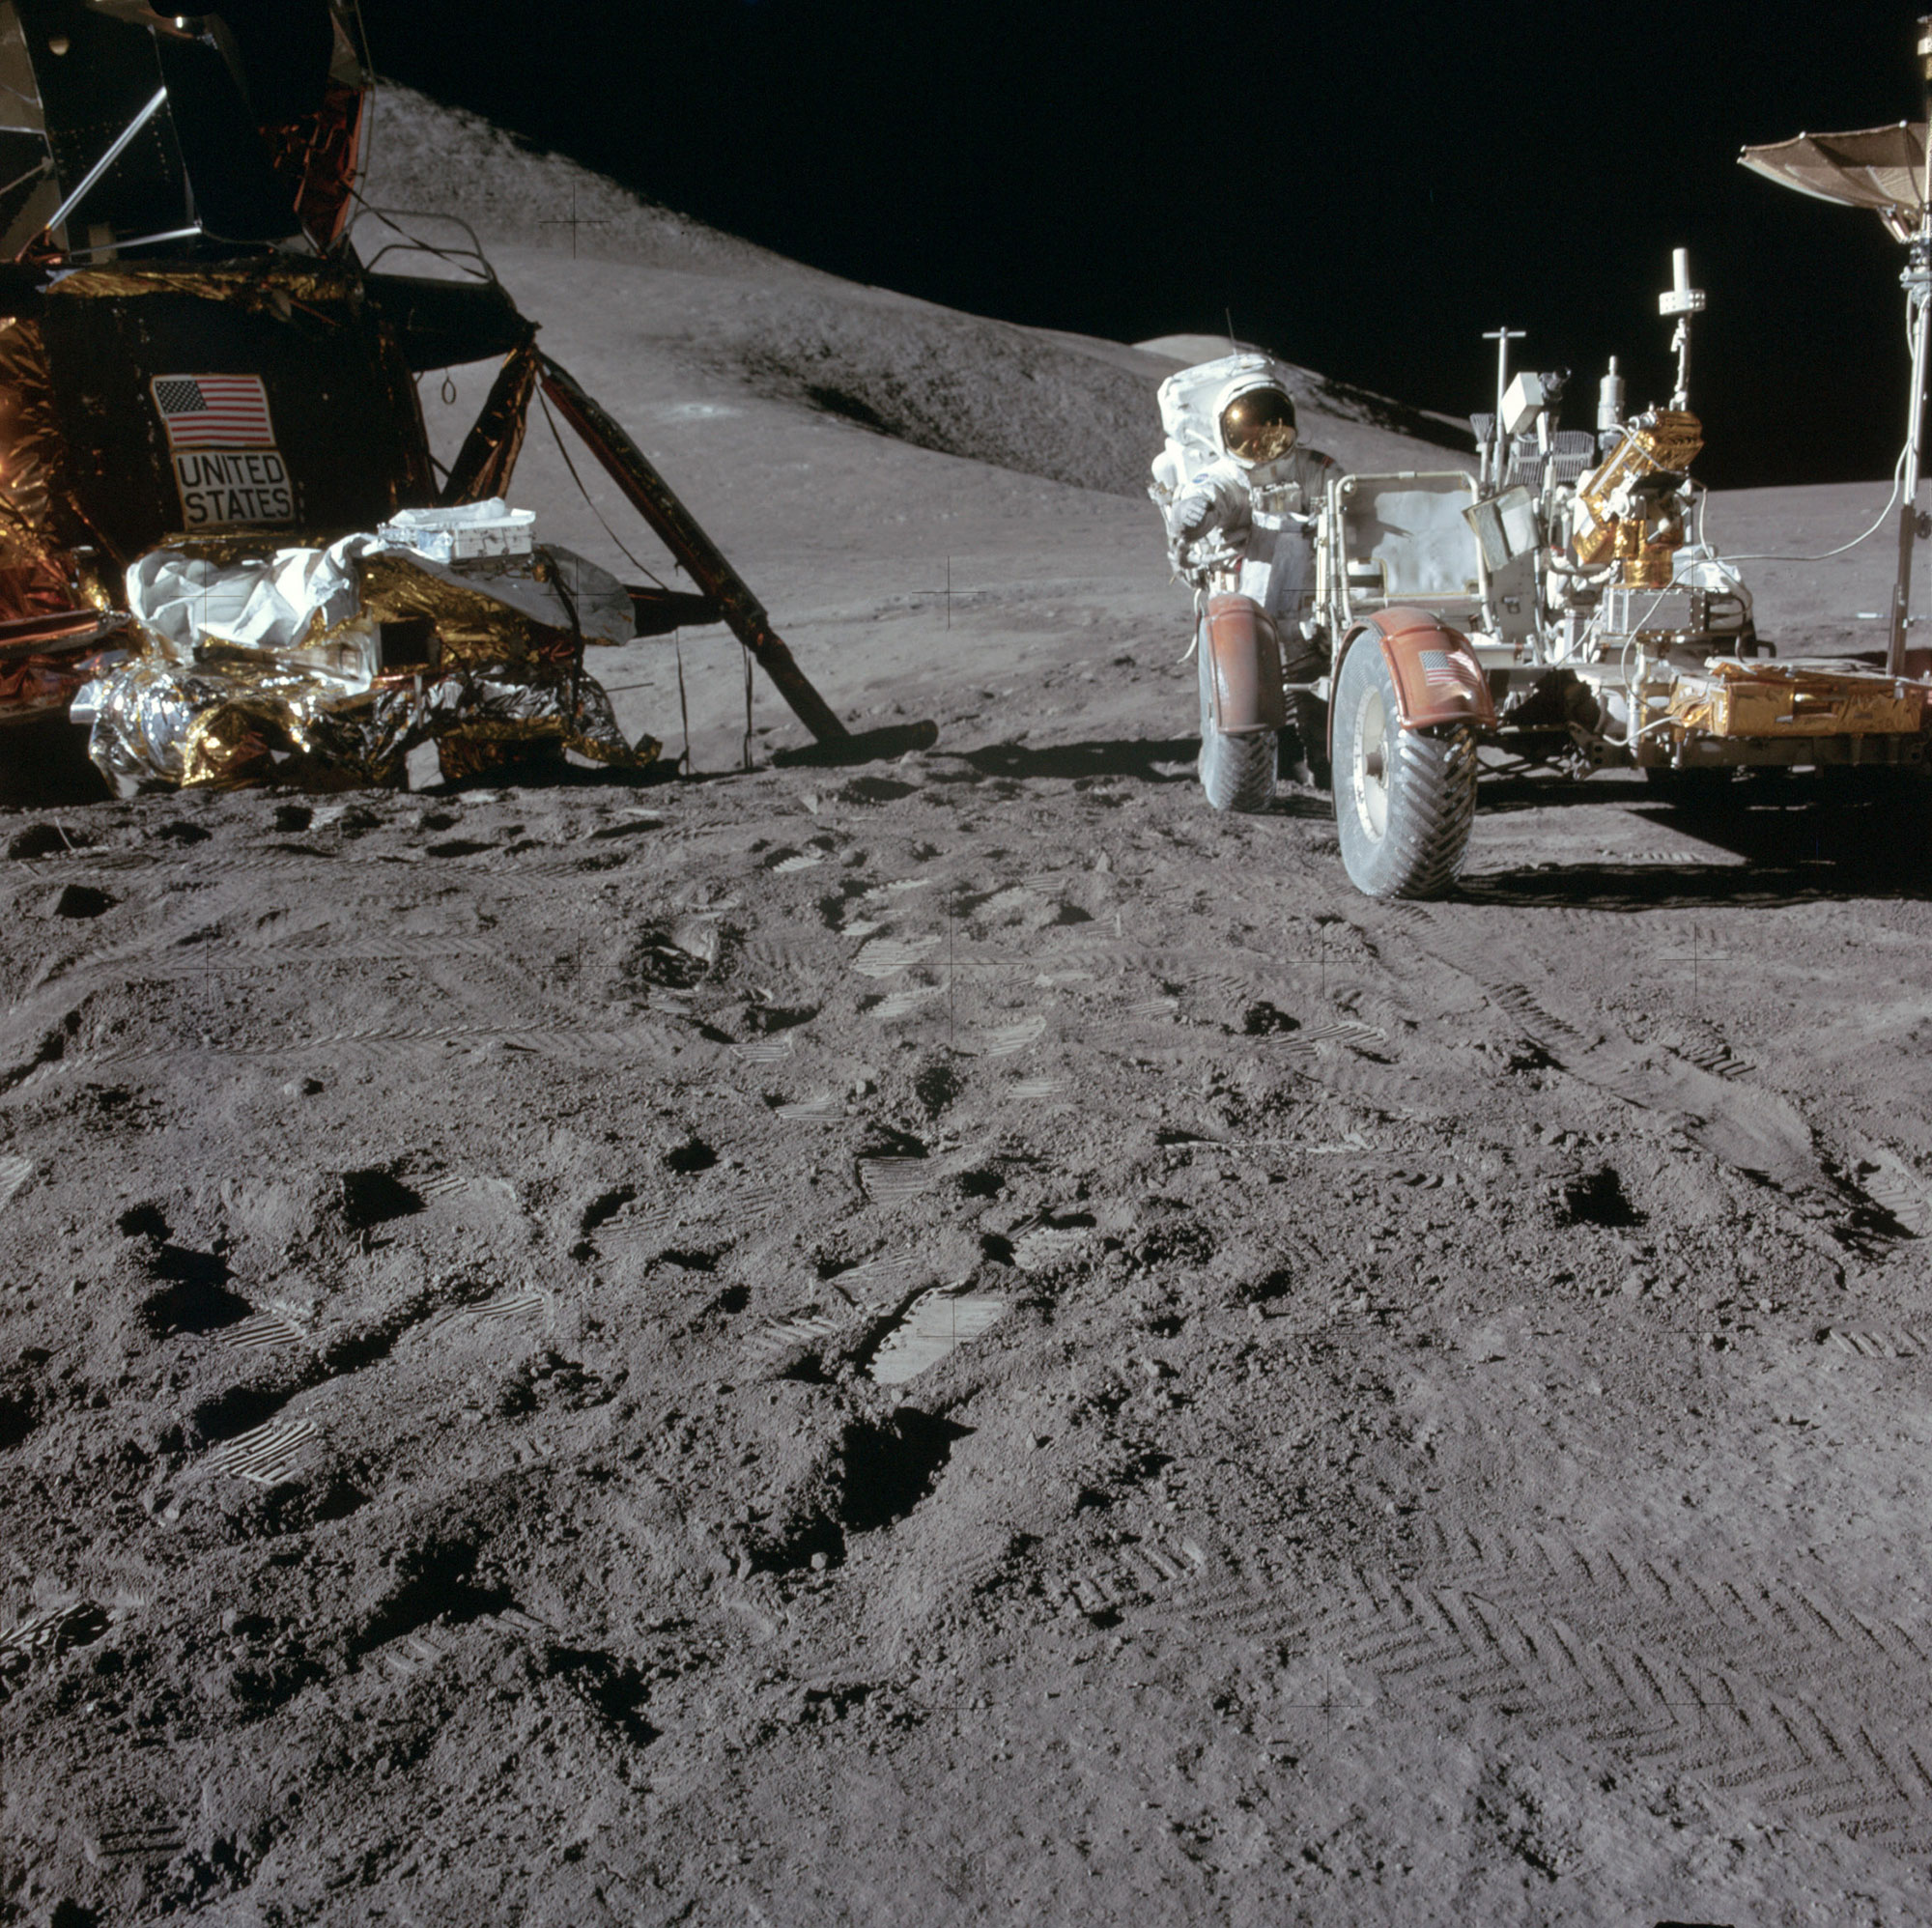 Jim Irwin works at the Lunar Roving Vehicle during the first EVA at the Hadley-Apennine landing site. A portion of the Falcon Lunar Module is on the left. The undeployed Laser Ranging Retro Reflector LR-3 lies atop the LM’s Modular Equipment Stowage Assembly MESA. Credit: NASA via Retro Space Images